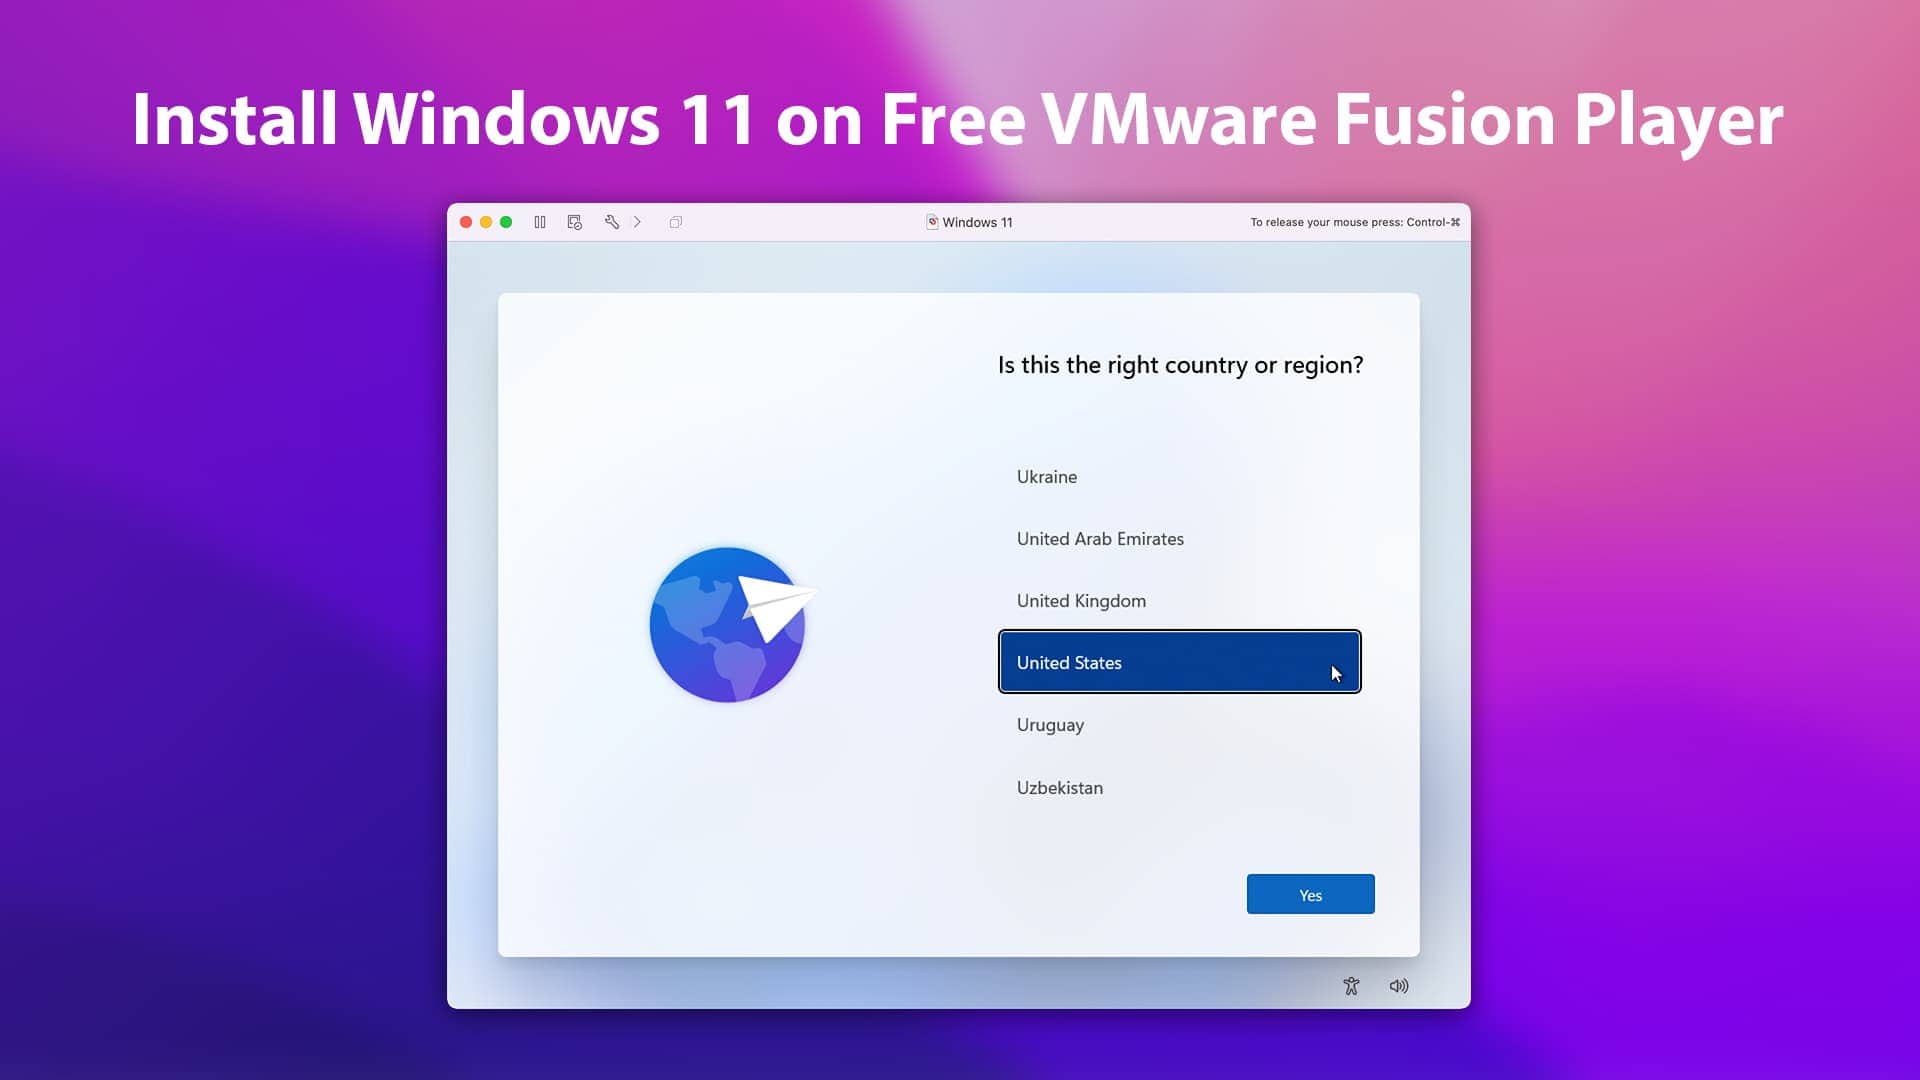 How to Install Windows 11 on Free VMware Fusion Player